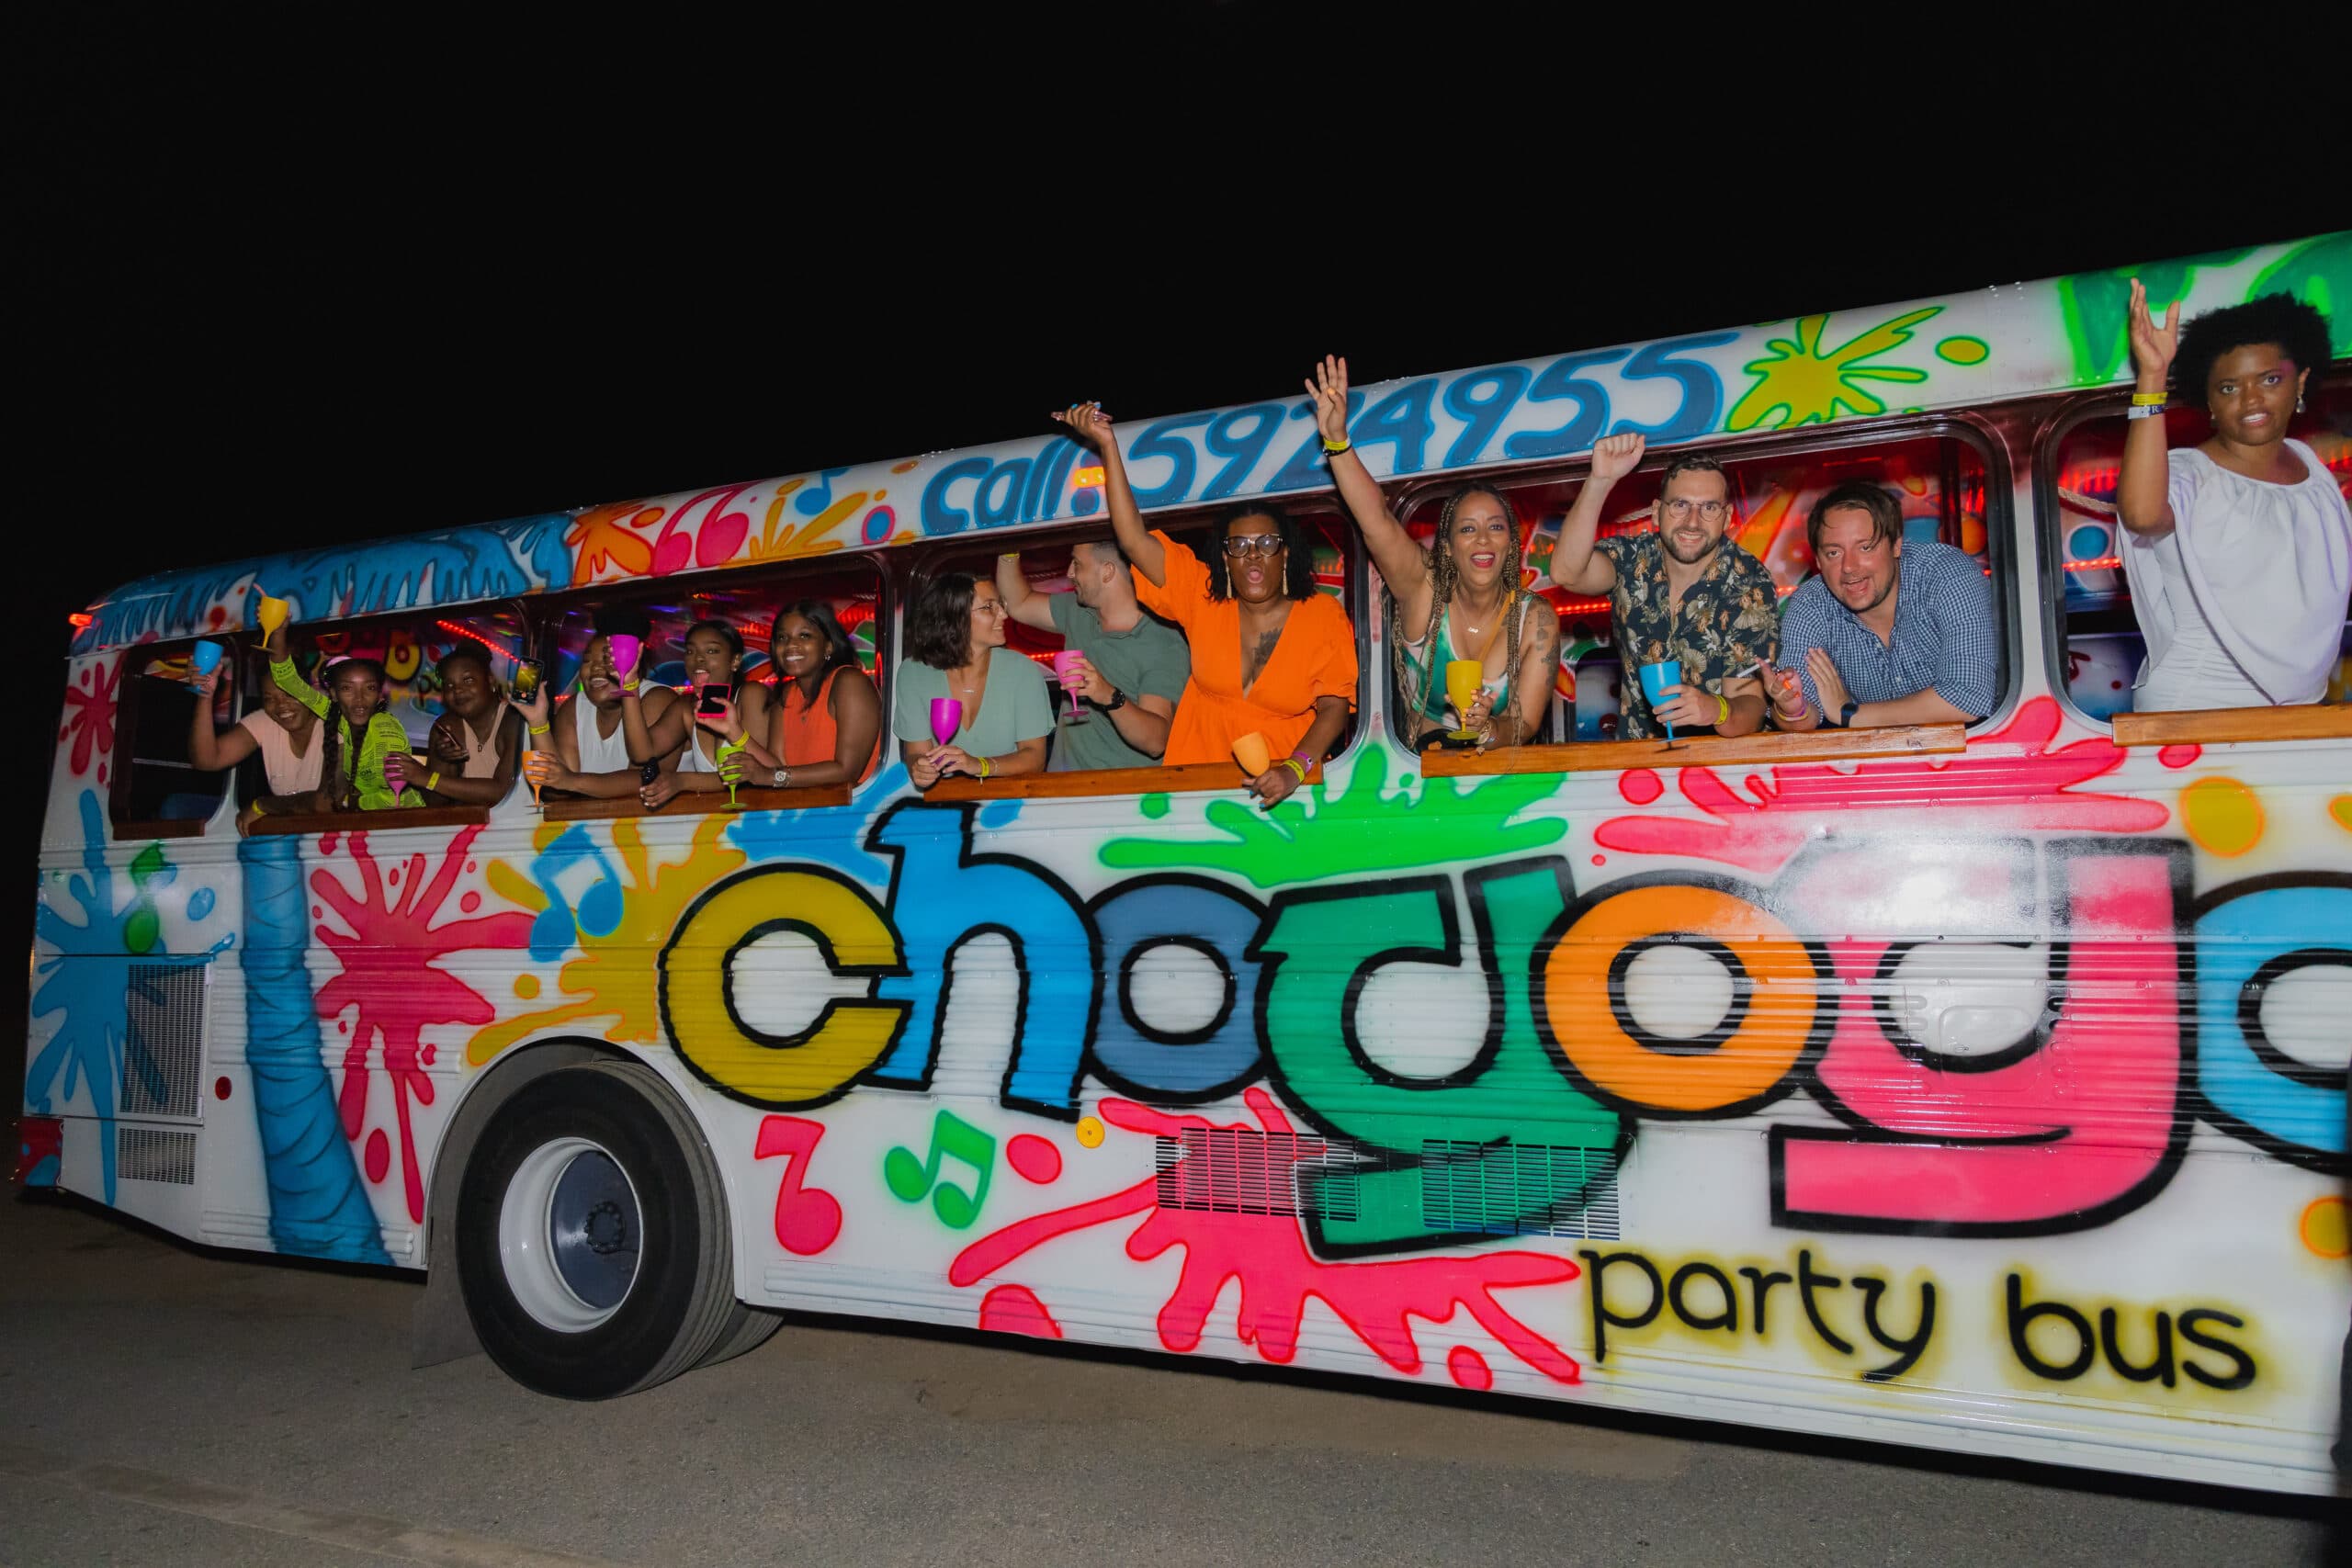 Create your own "Party Bus"